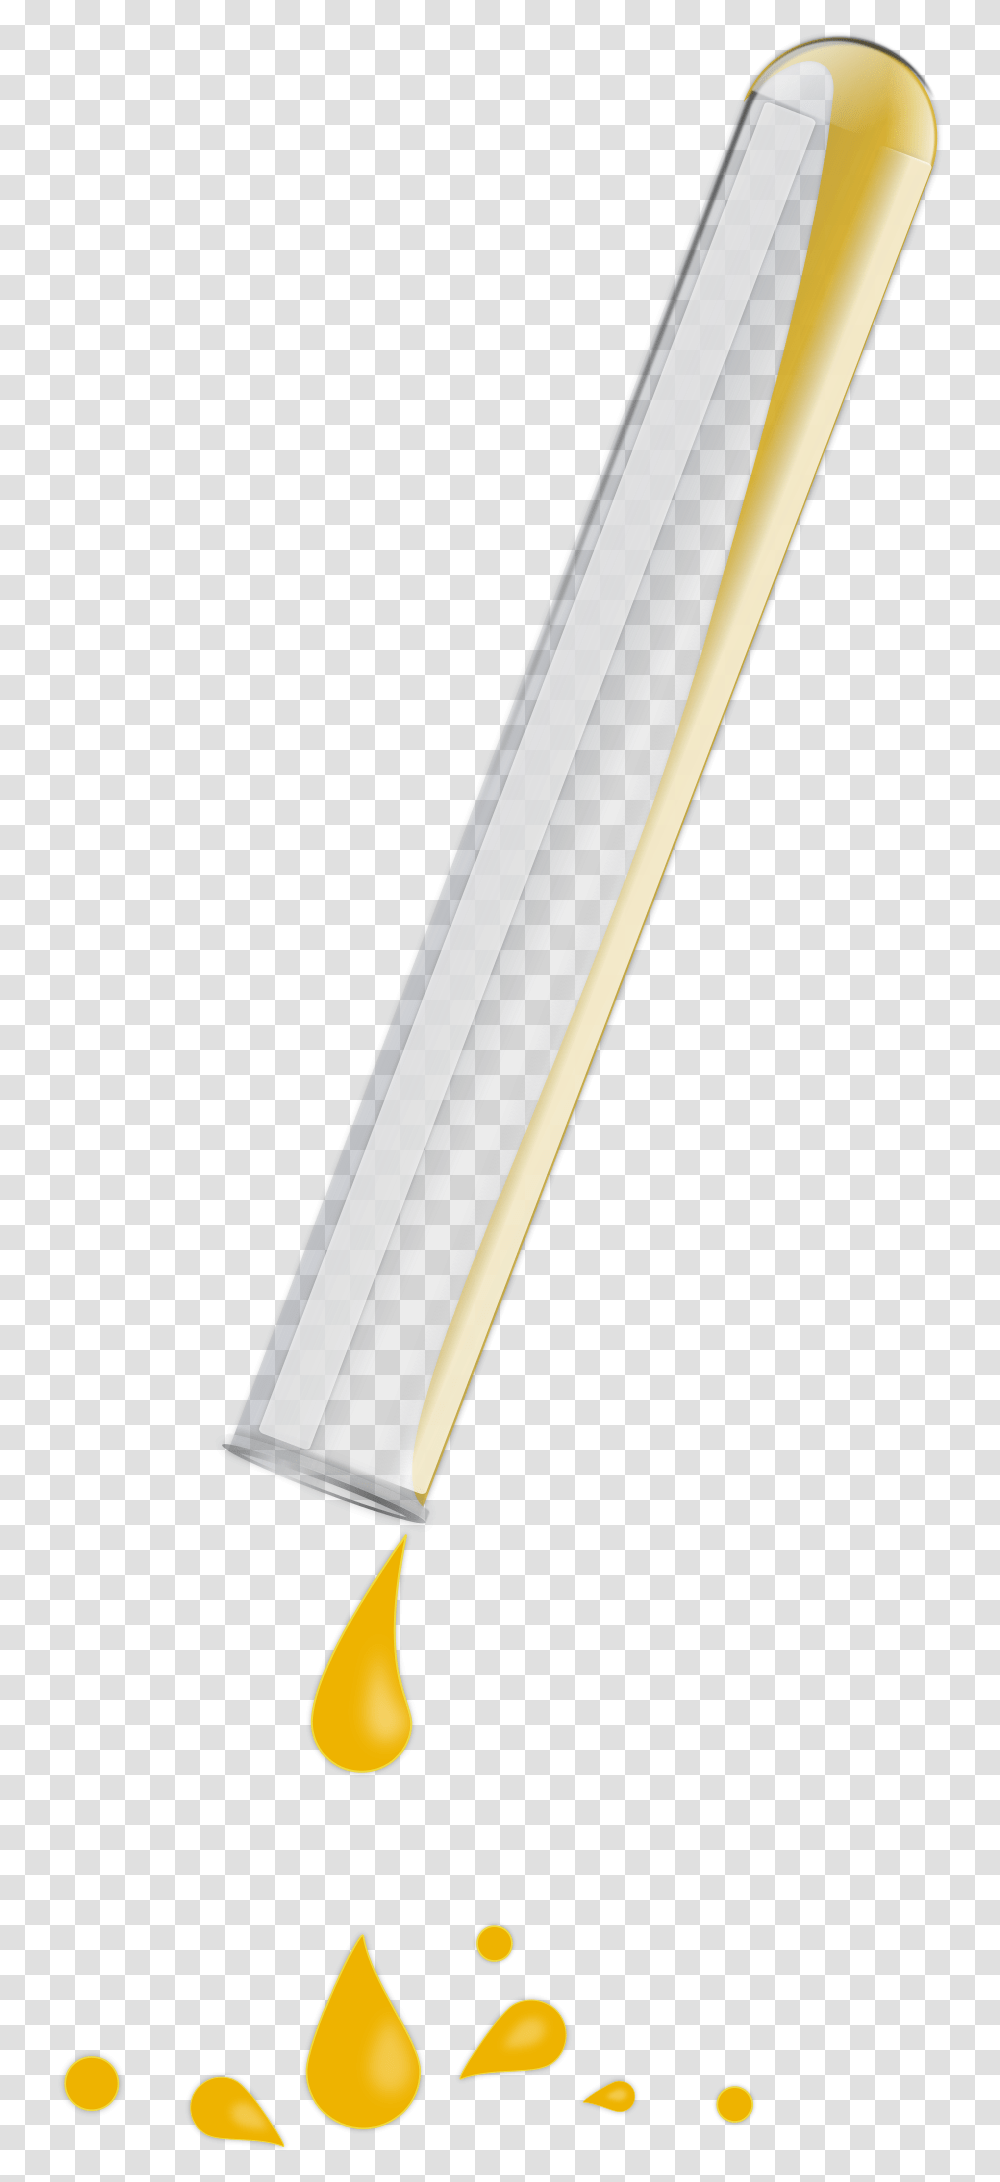 This Free Icons Design Of Test Tube Dripping Test Tube Dripping, Sword, Blade, Weapon, Weaponry Transparent Png